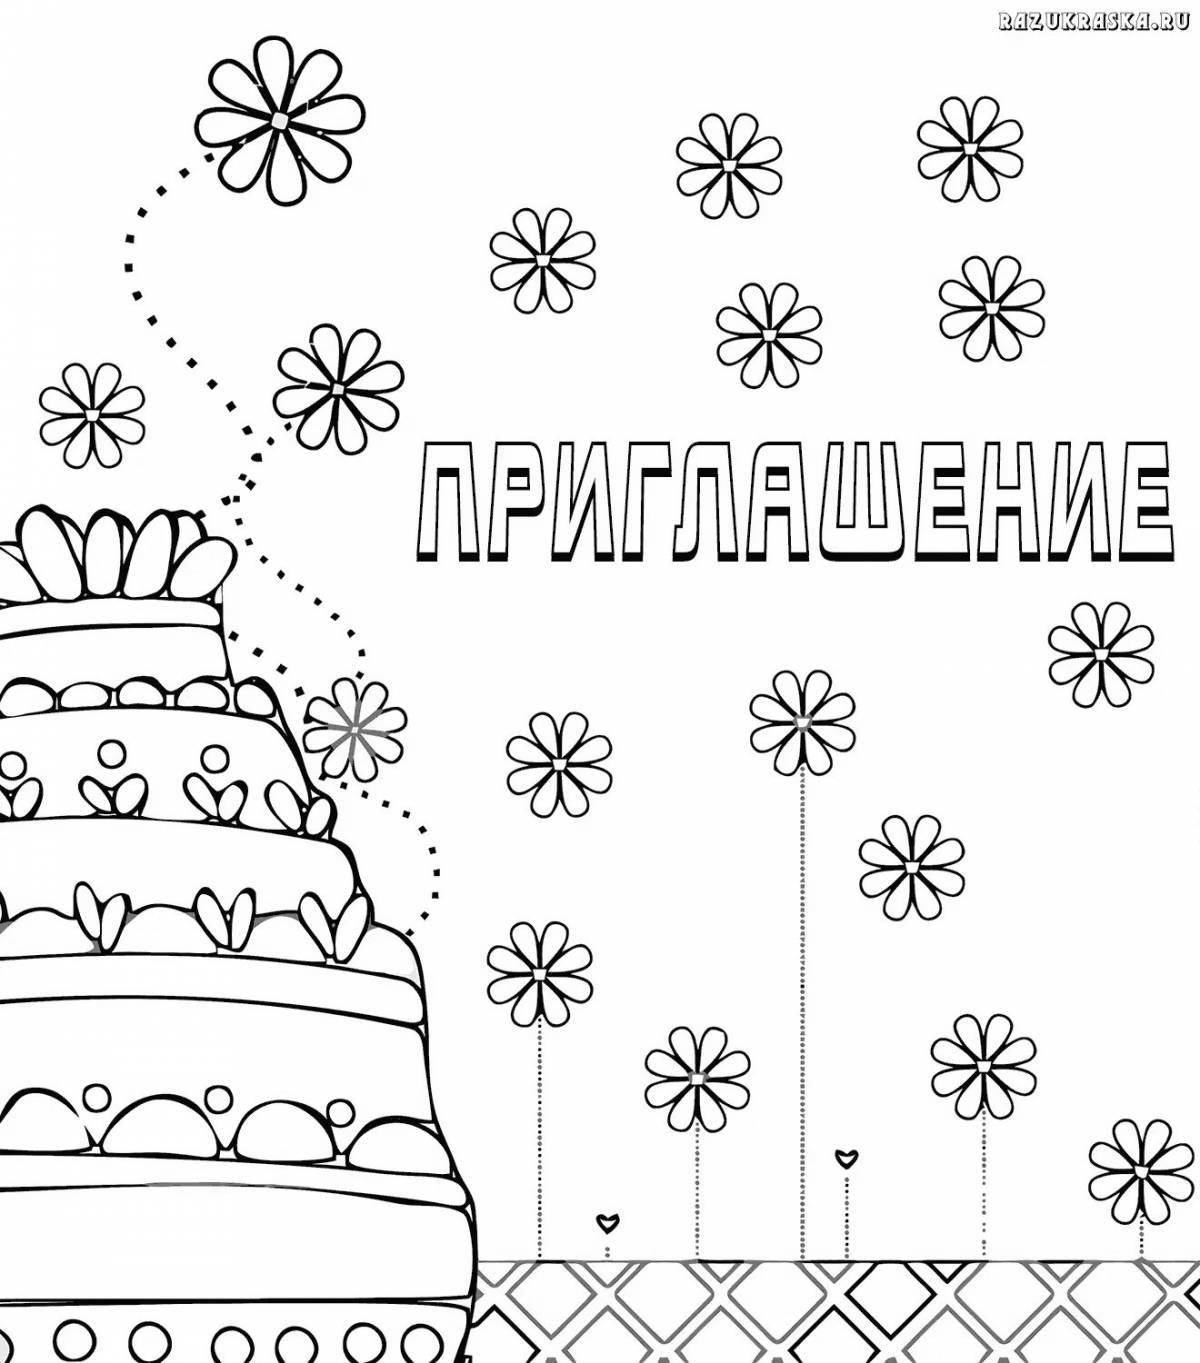 Coloring the birthday invitation in frenzied color